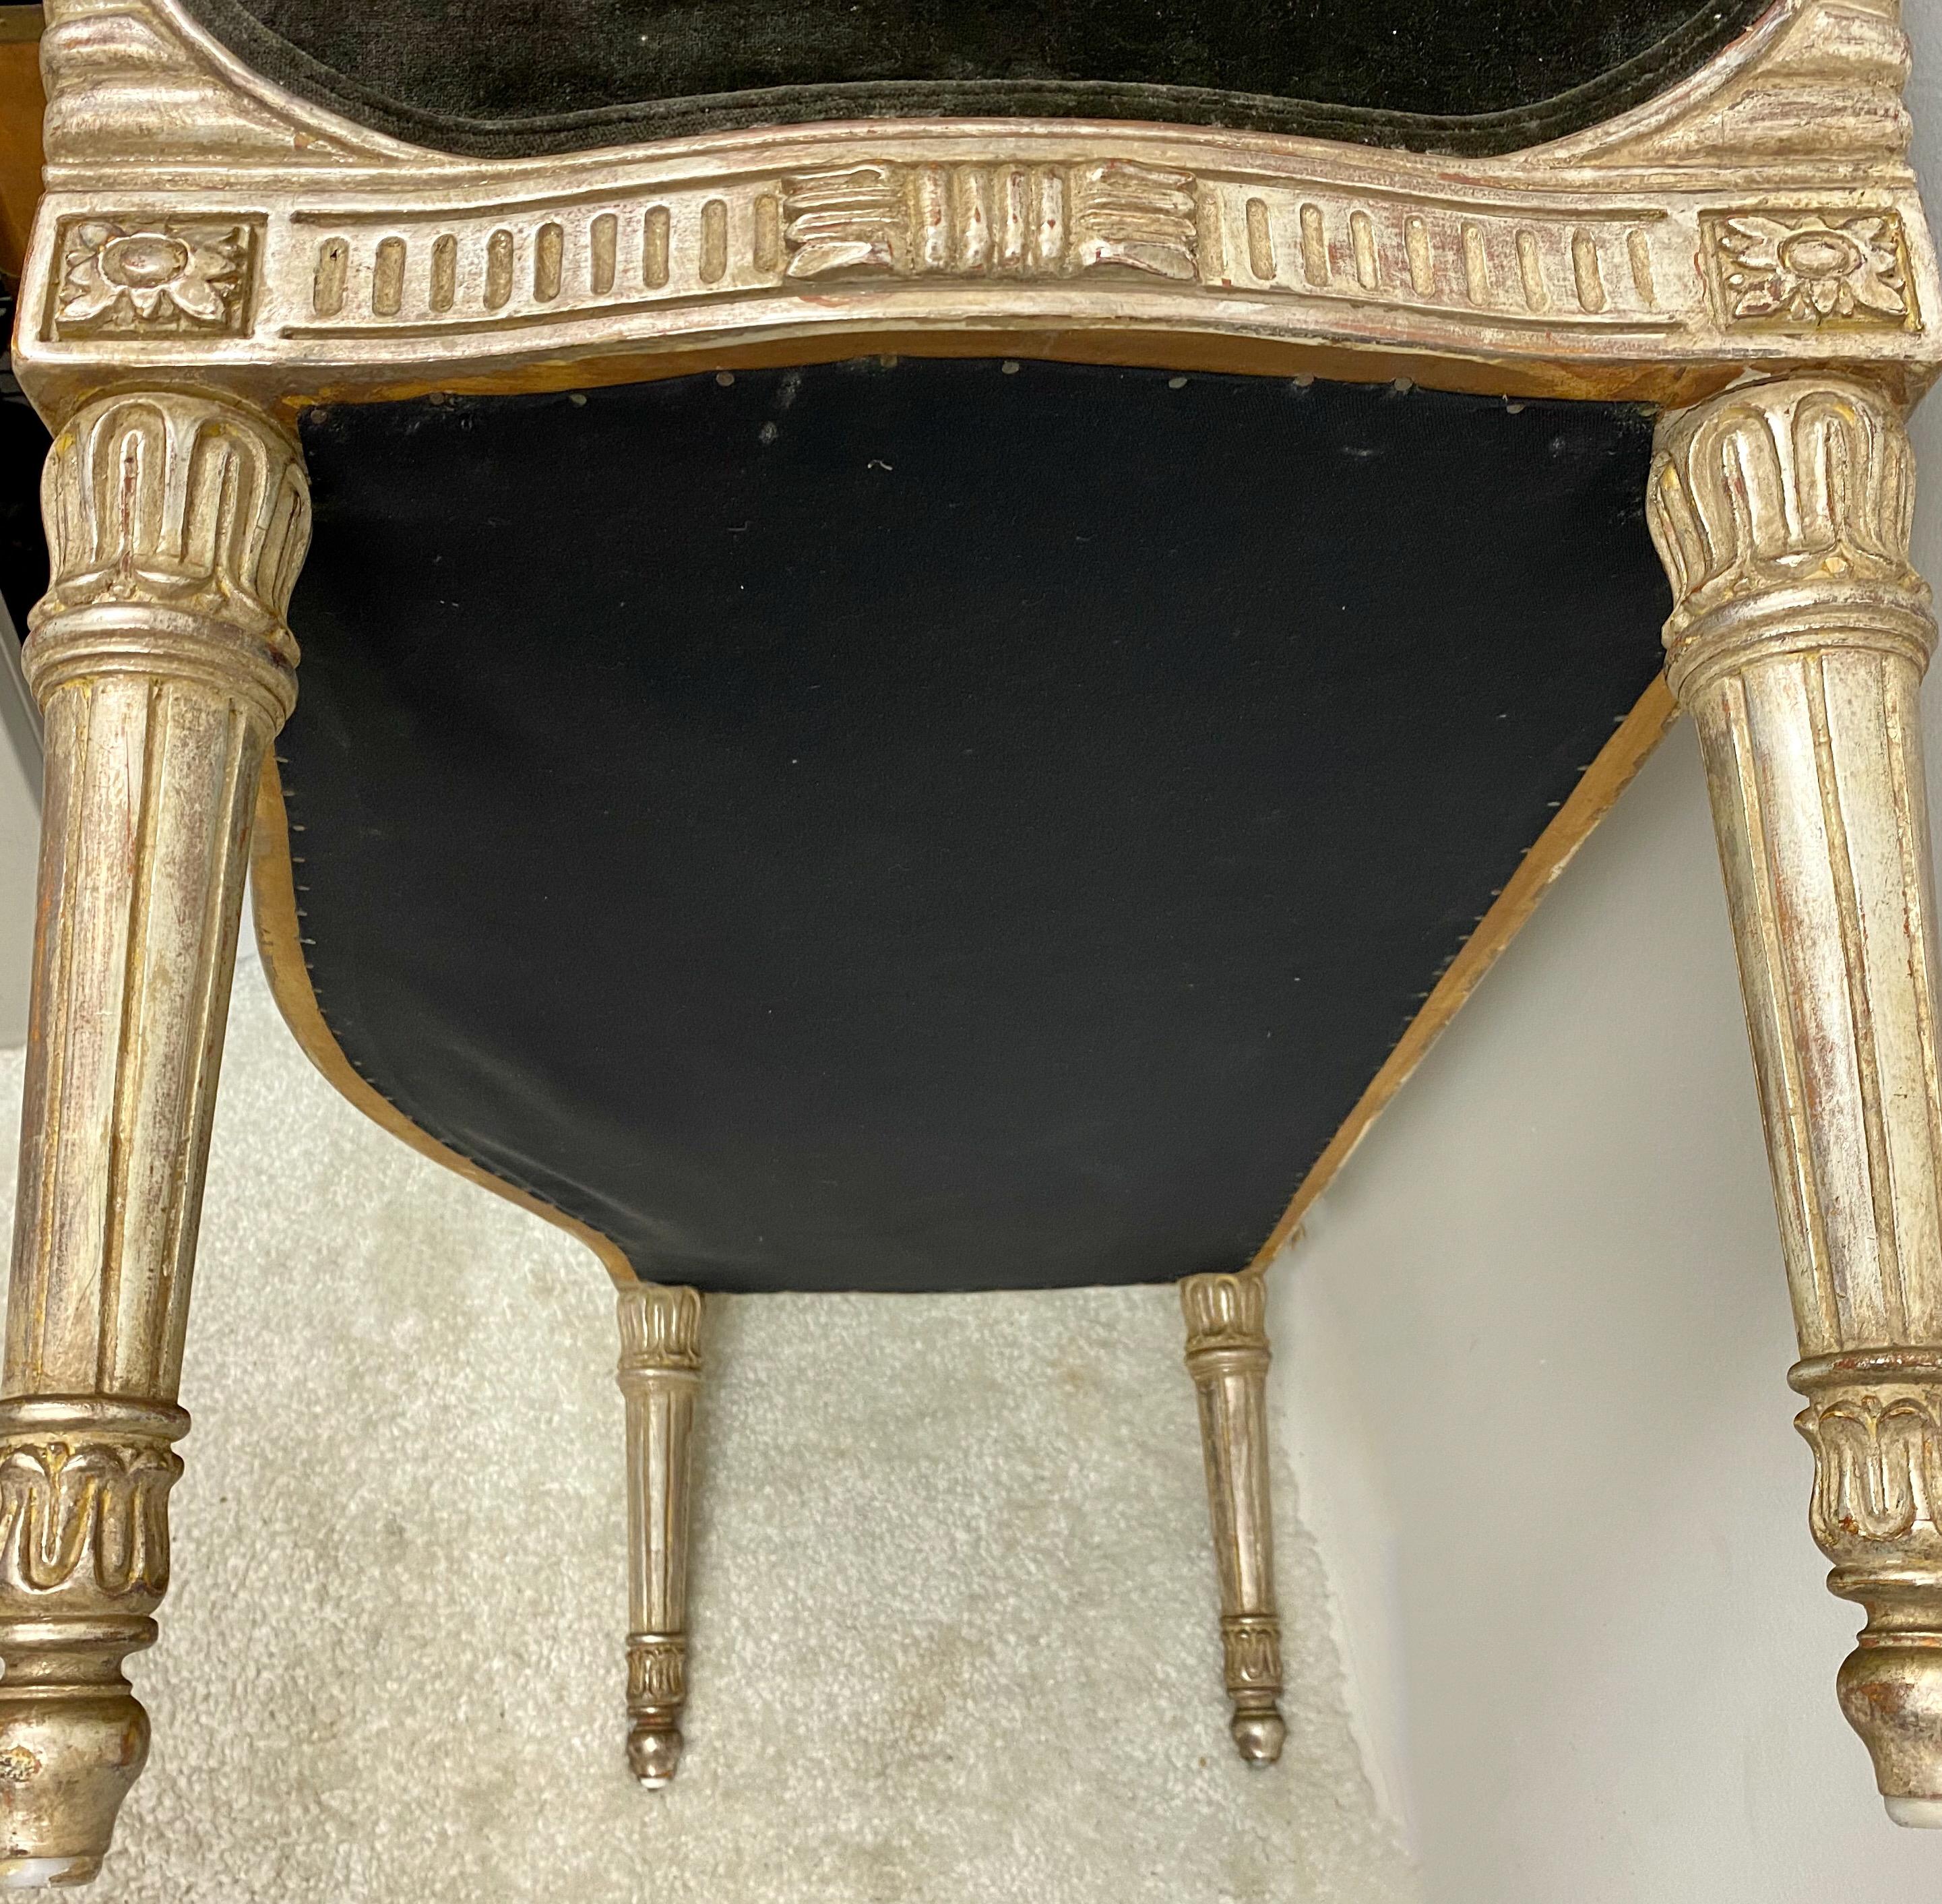 This is a midcentury, most likely 1950s, carved Italian bench with vintage mushroom colored crushed velvet. The frame has a beautiful silver gilt finish. It is unmarked. Measures: Seat 18”.